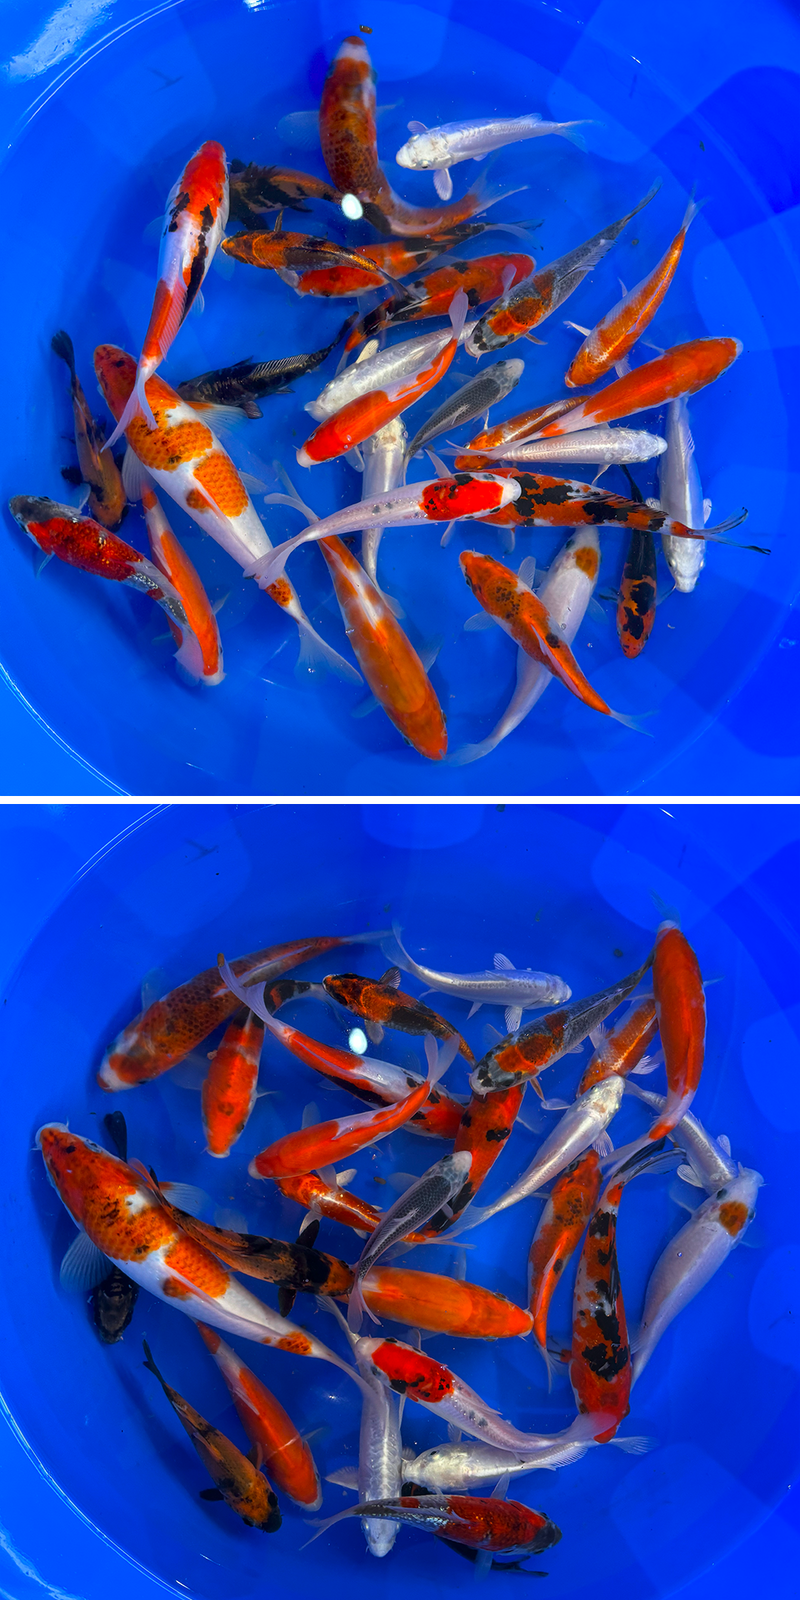 A beautiful collection of young tosai from 3 well known breeders in Japan. This is a superb mixture with plenty of varieties. Beni Kumonryu, goromo, doitsu platinum ogons, etc. There's great sized fish in here too, which at this price is an absolute steal! Specific fish can be selected via photos and videos. Contact us for more information!